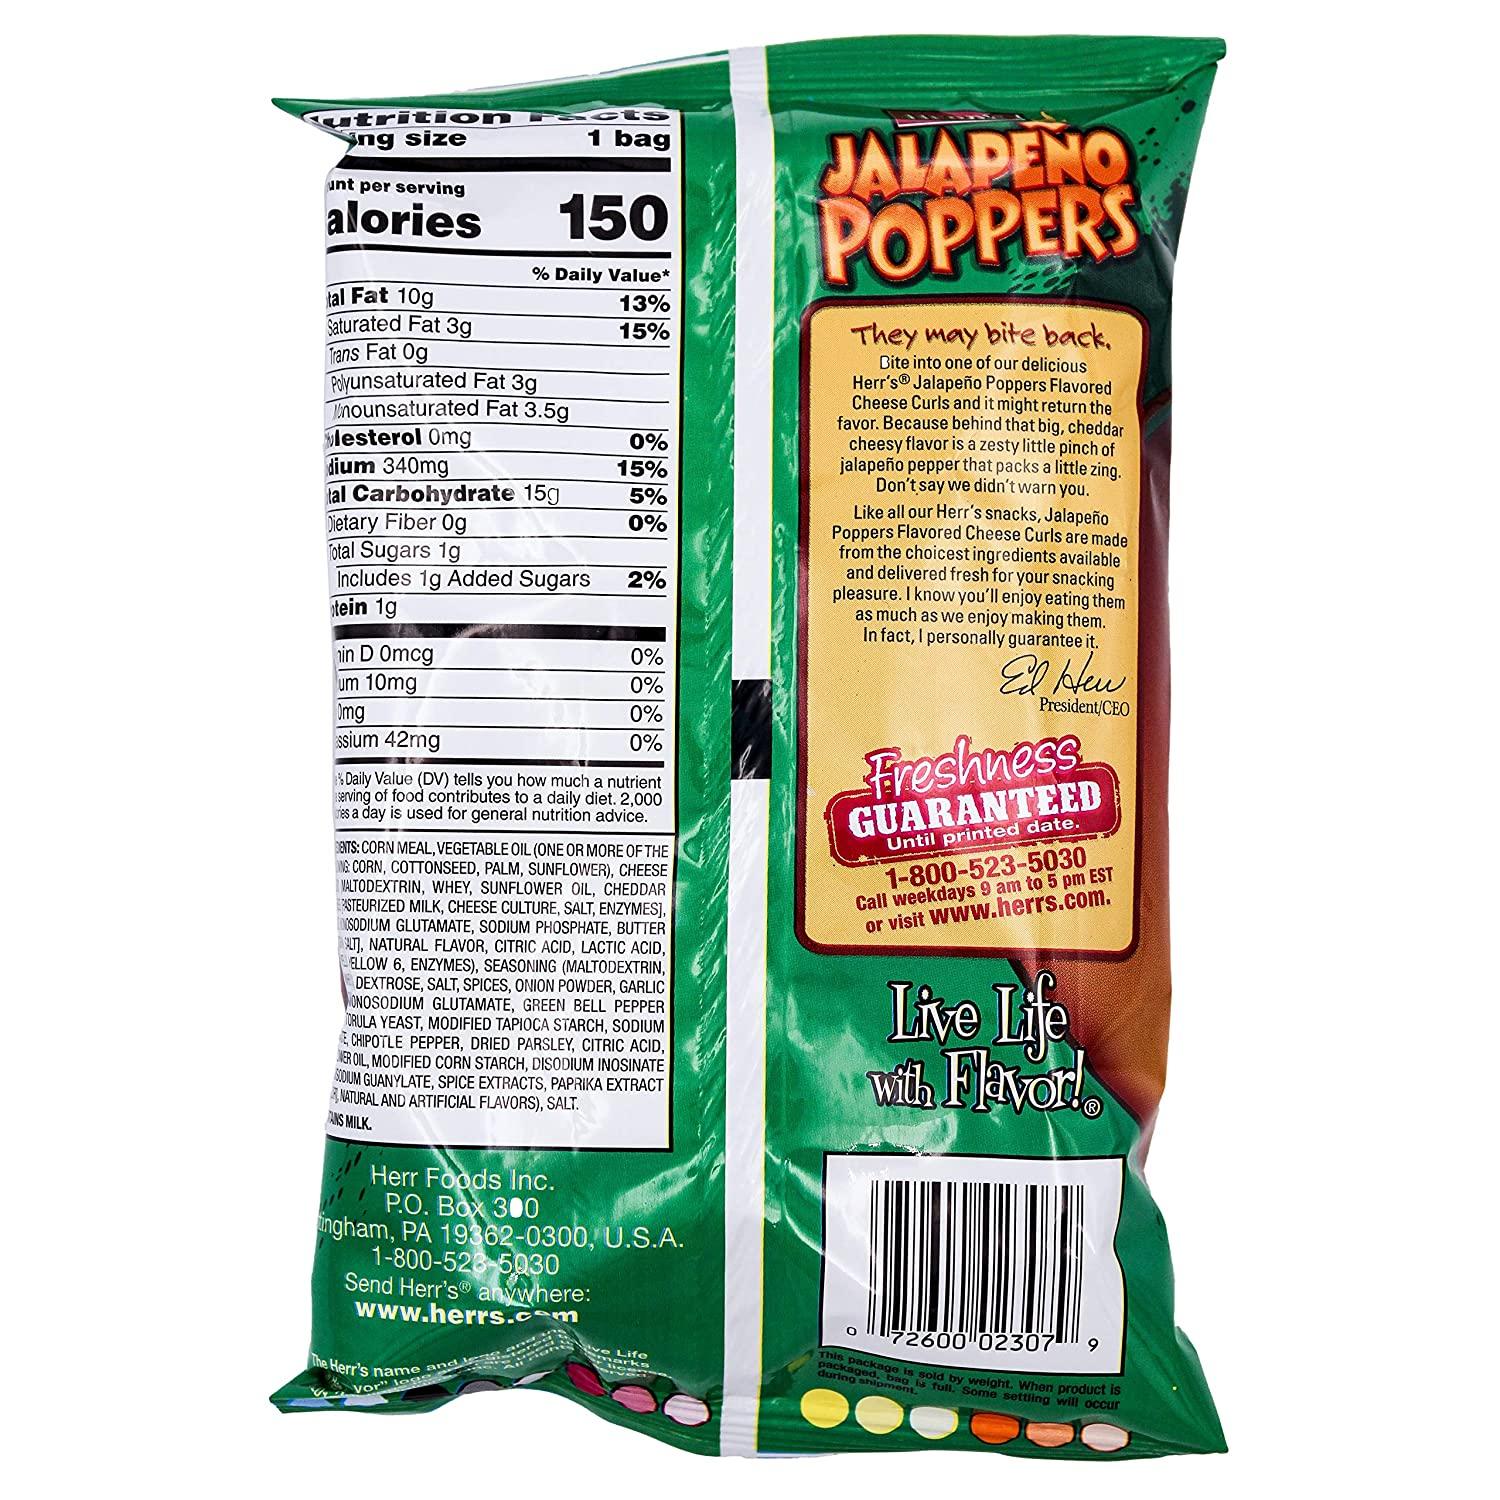 HERR'S Jalapeno Poppers Flavored Cheese Curls, Gluten-Free, 1oz Bag (Pack of 12, Total of 12 Oz)